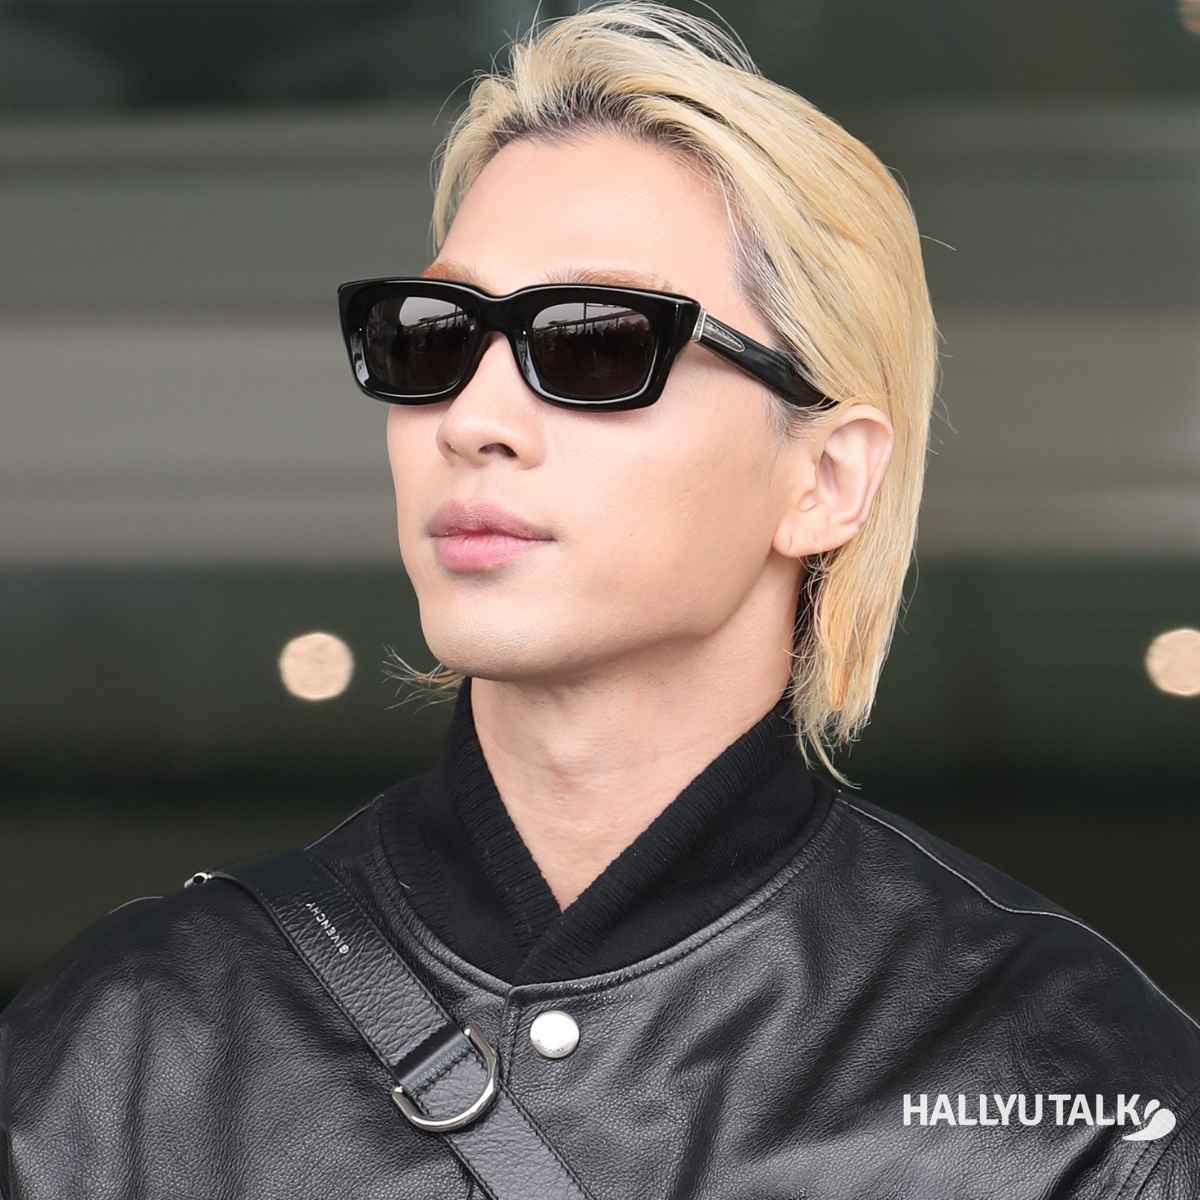 Taeyang; Picture Courtesy: News1